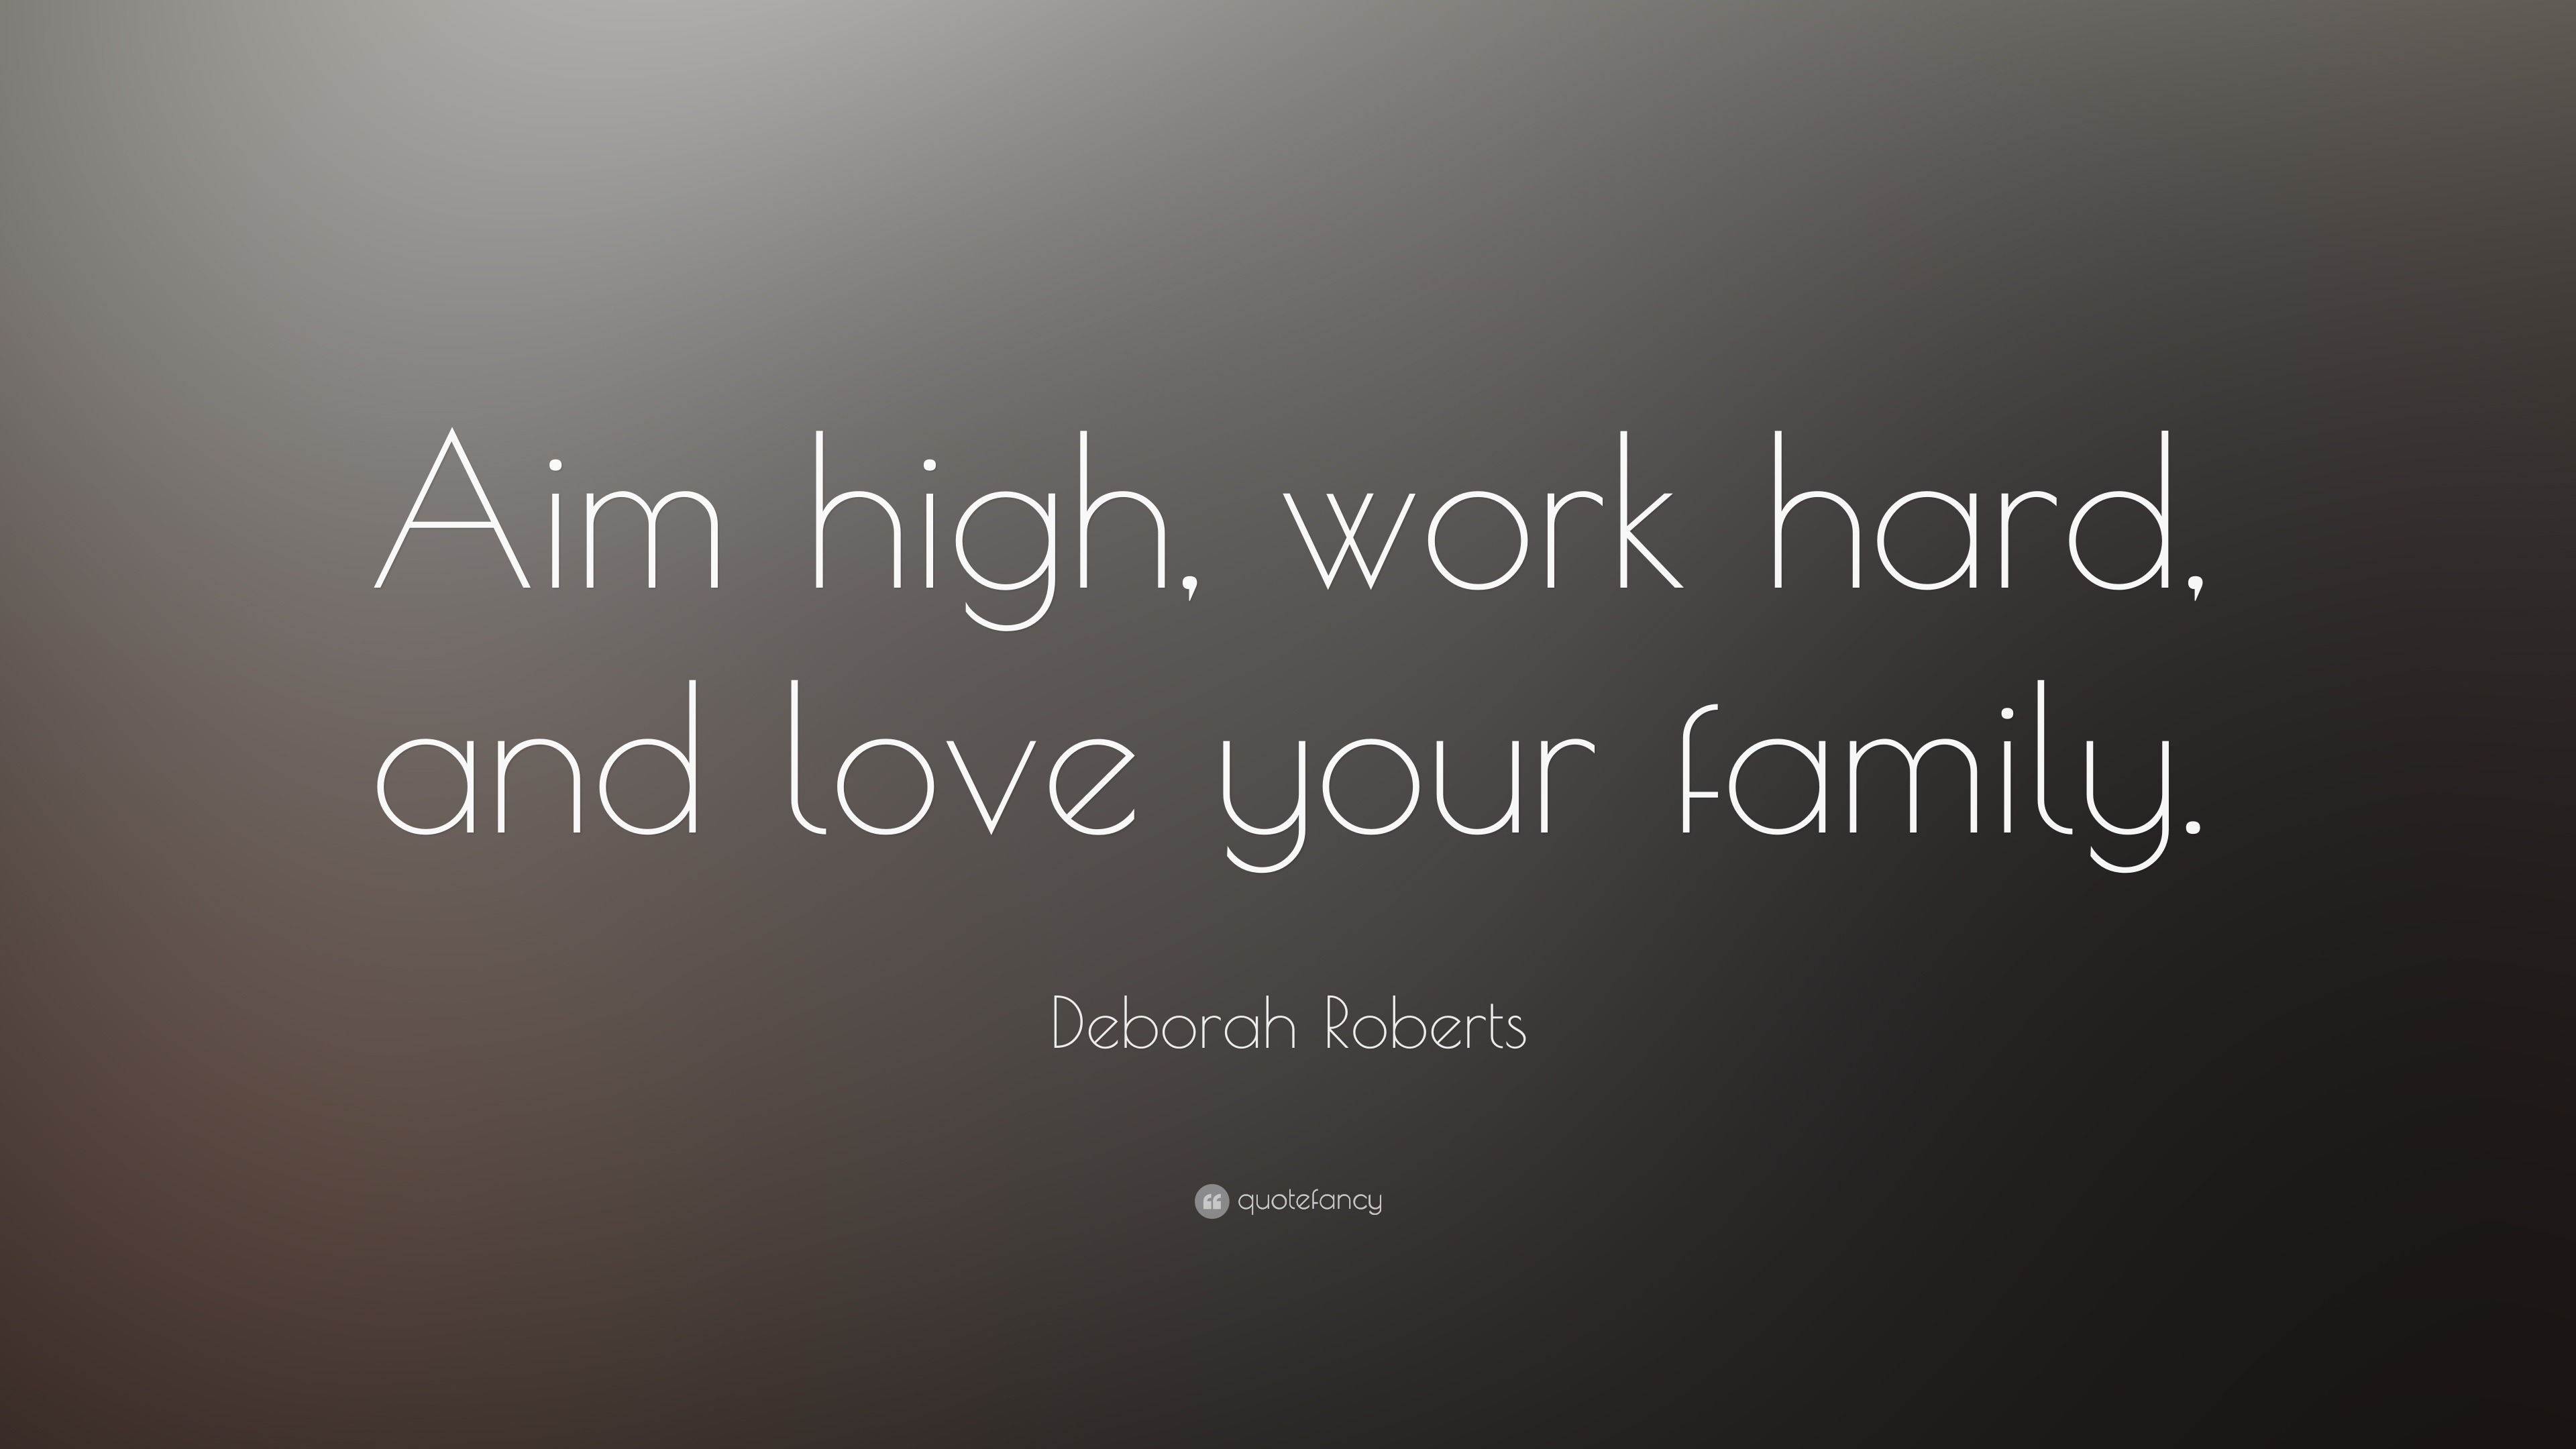 Deborah Roberts Quote “Aim high work hard and love your family